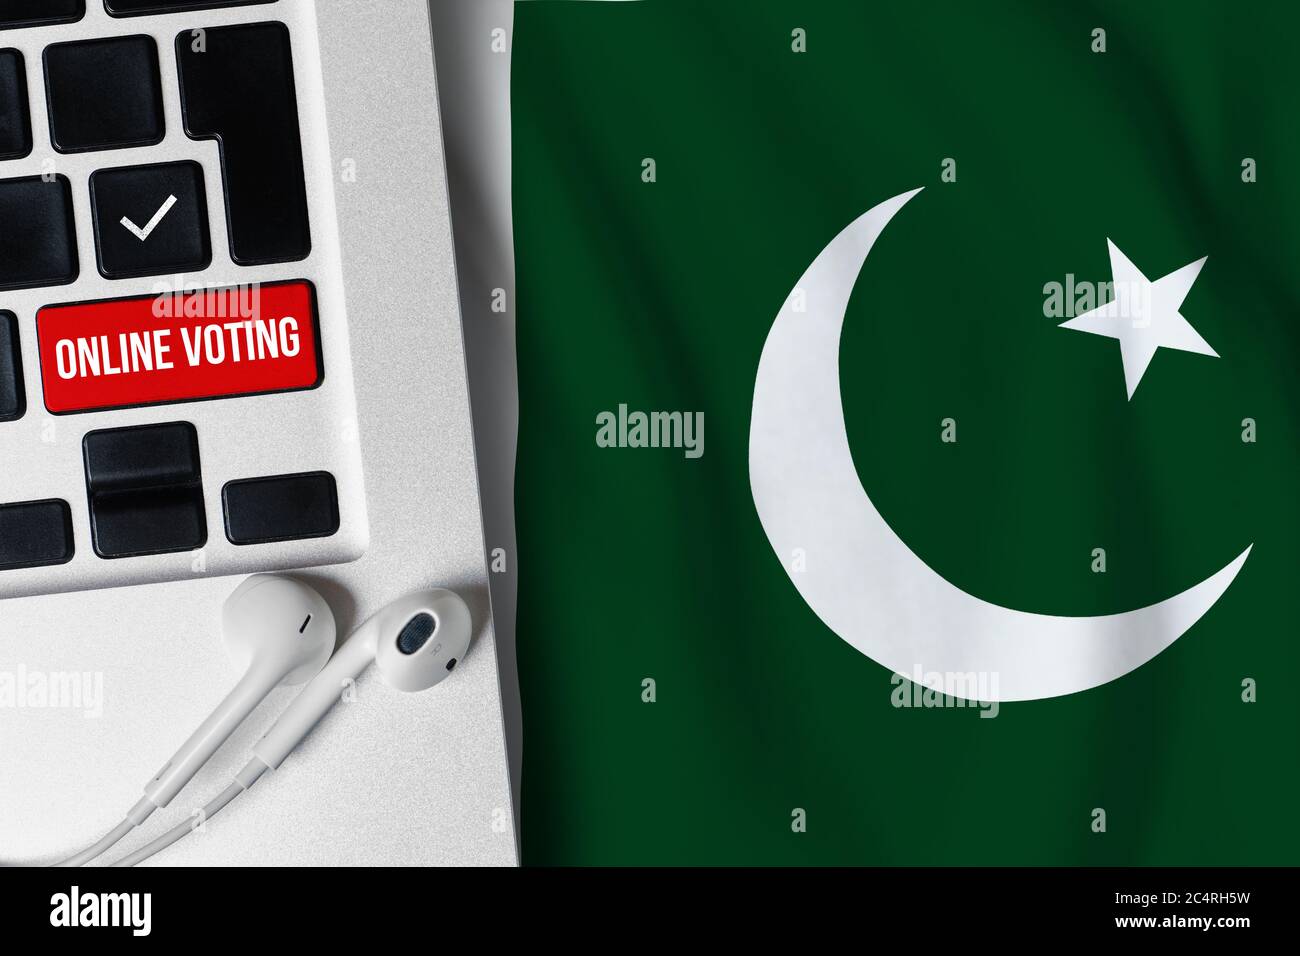 Online voting concept in Islamic Republic of Pakistan. Keyboard near country flag. Stock Photo